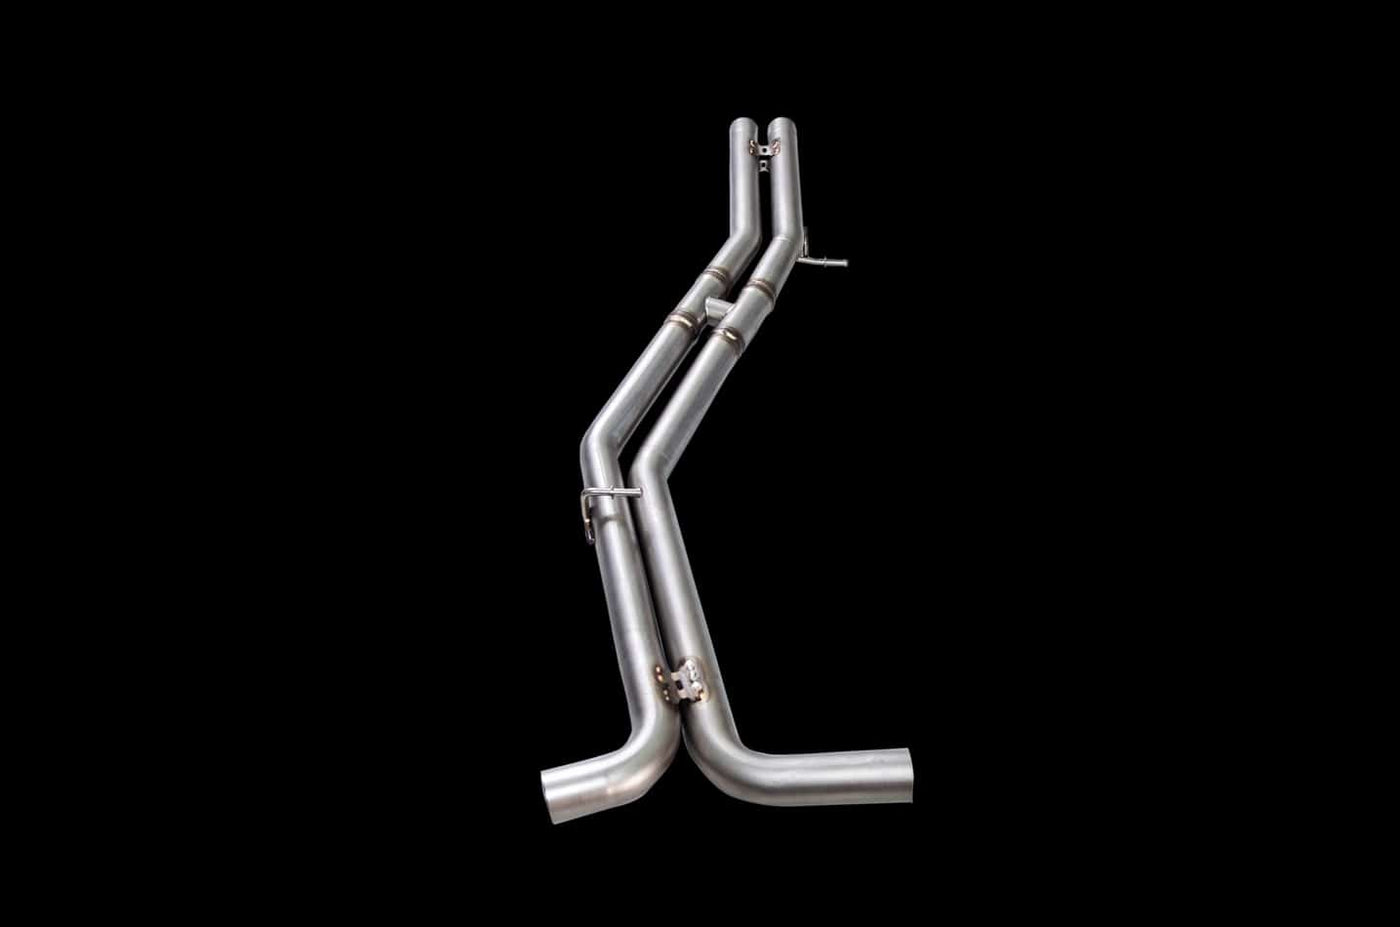 Audi A7 (C8) 3.0T 55 TFSI Exhaust System - MidPipe